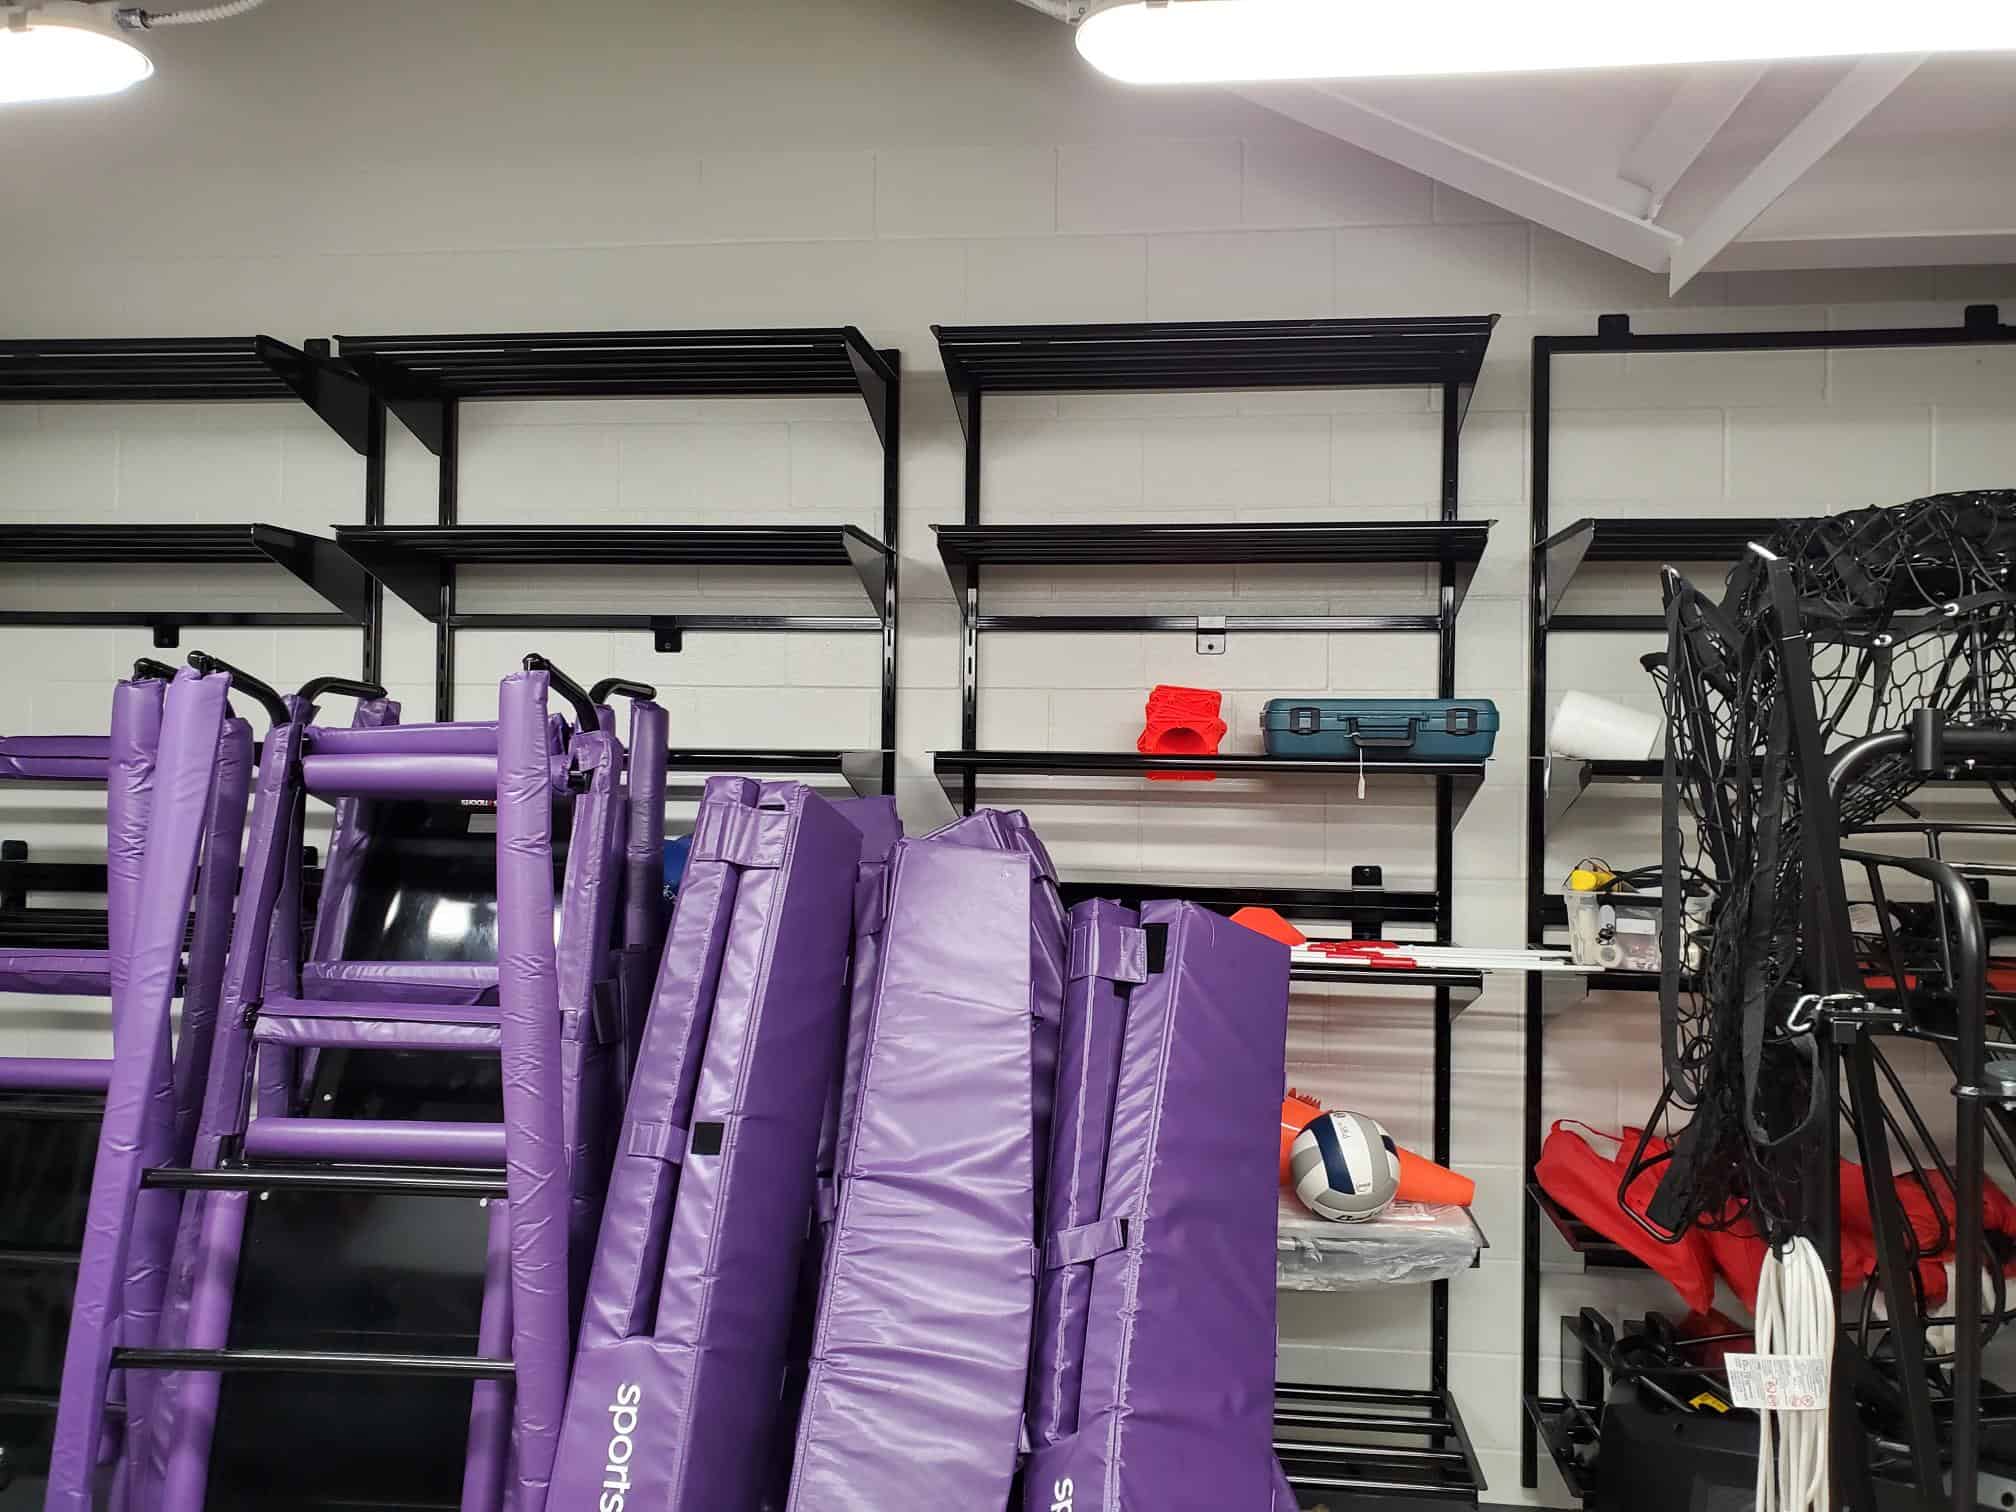 MeTeor Educations Success with GearGrid Athletic Storage Systems 2